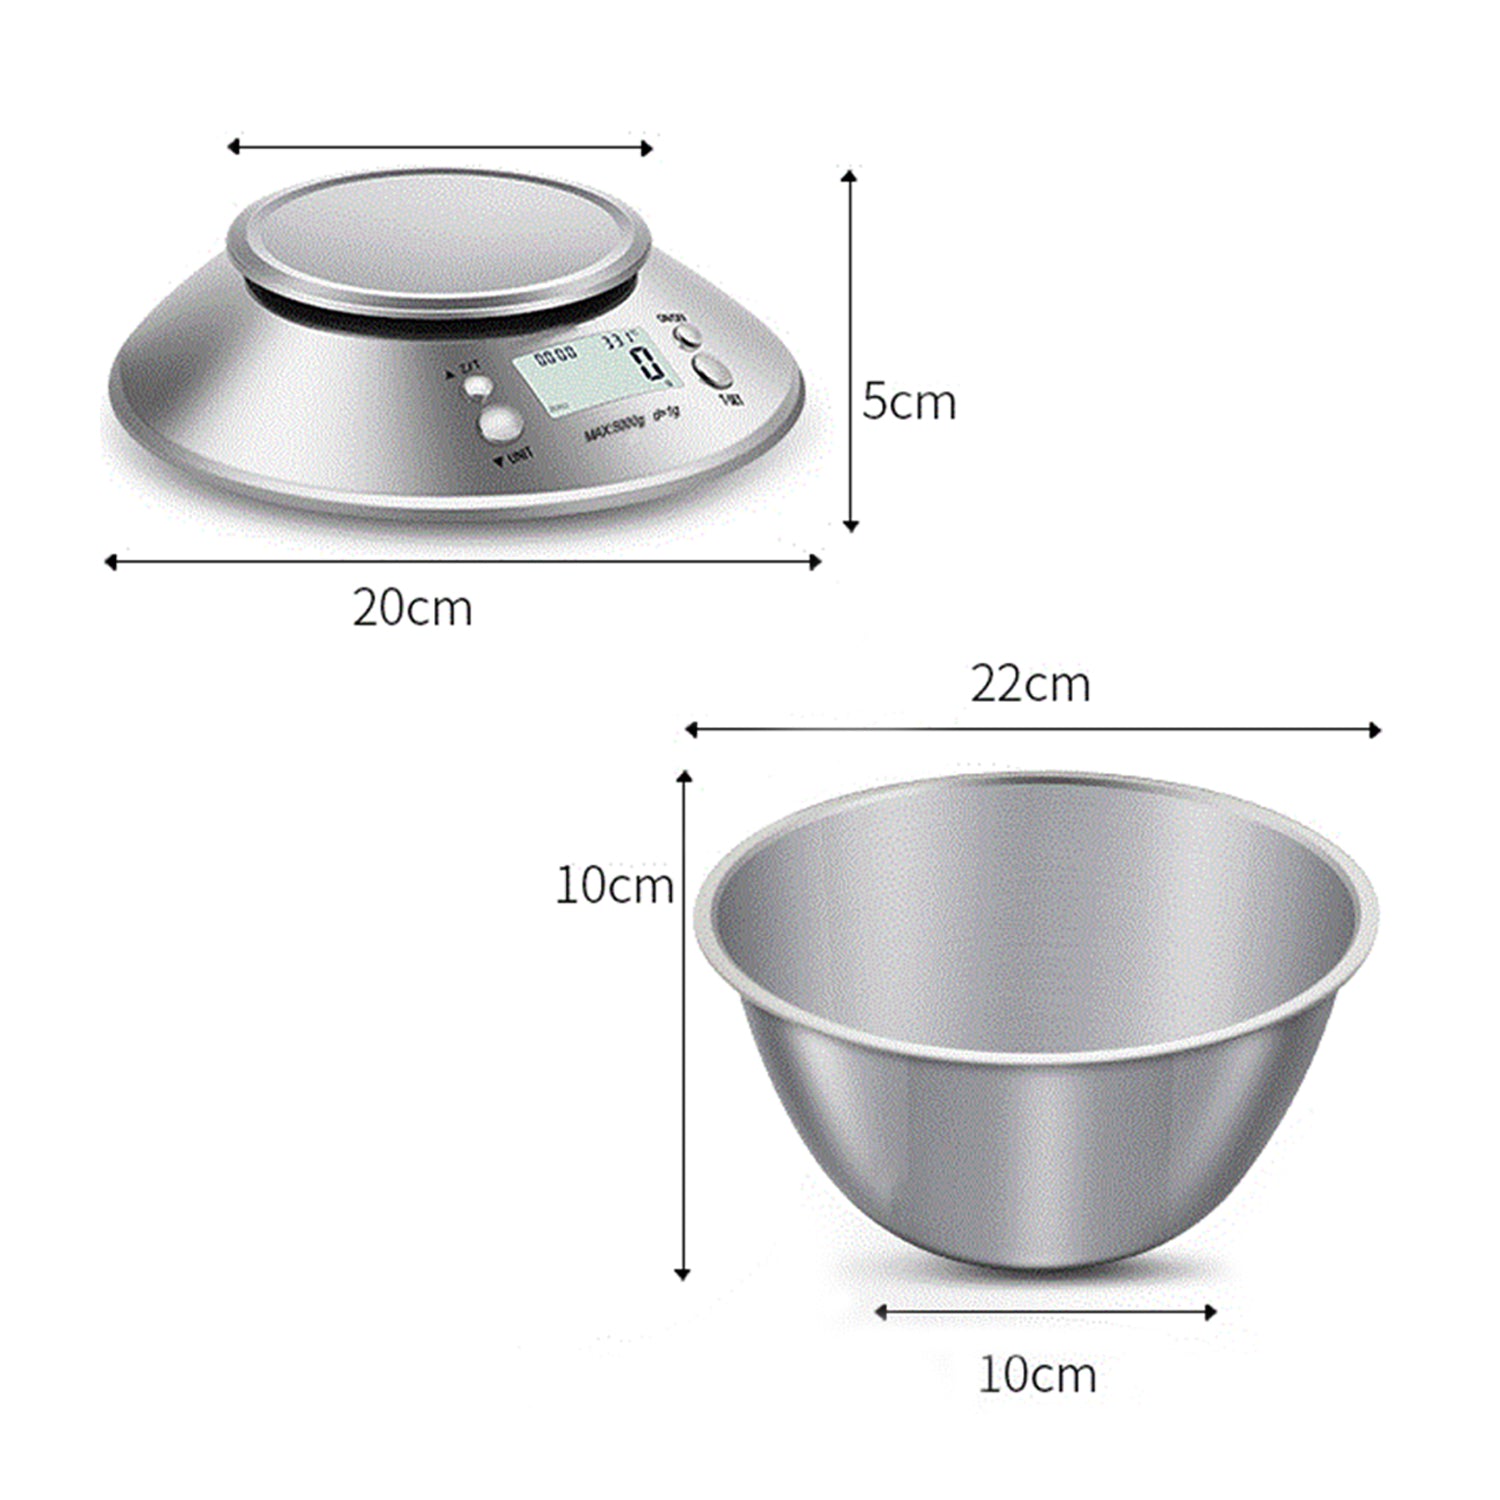 Digital Kitchen Scale 0.1oz/1g High Accuracy Multifunction Food Scale with Removable Bowl Electronic Stainless Steel Scale for Cooking, Max 11lb/5kg